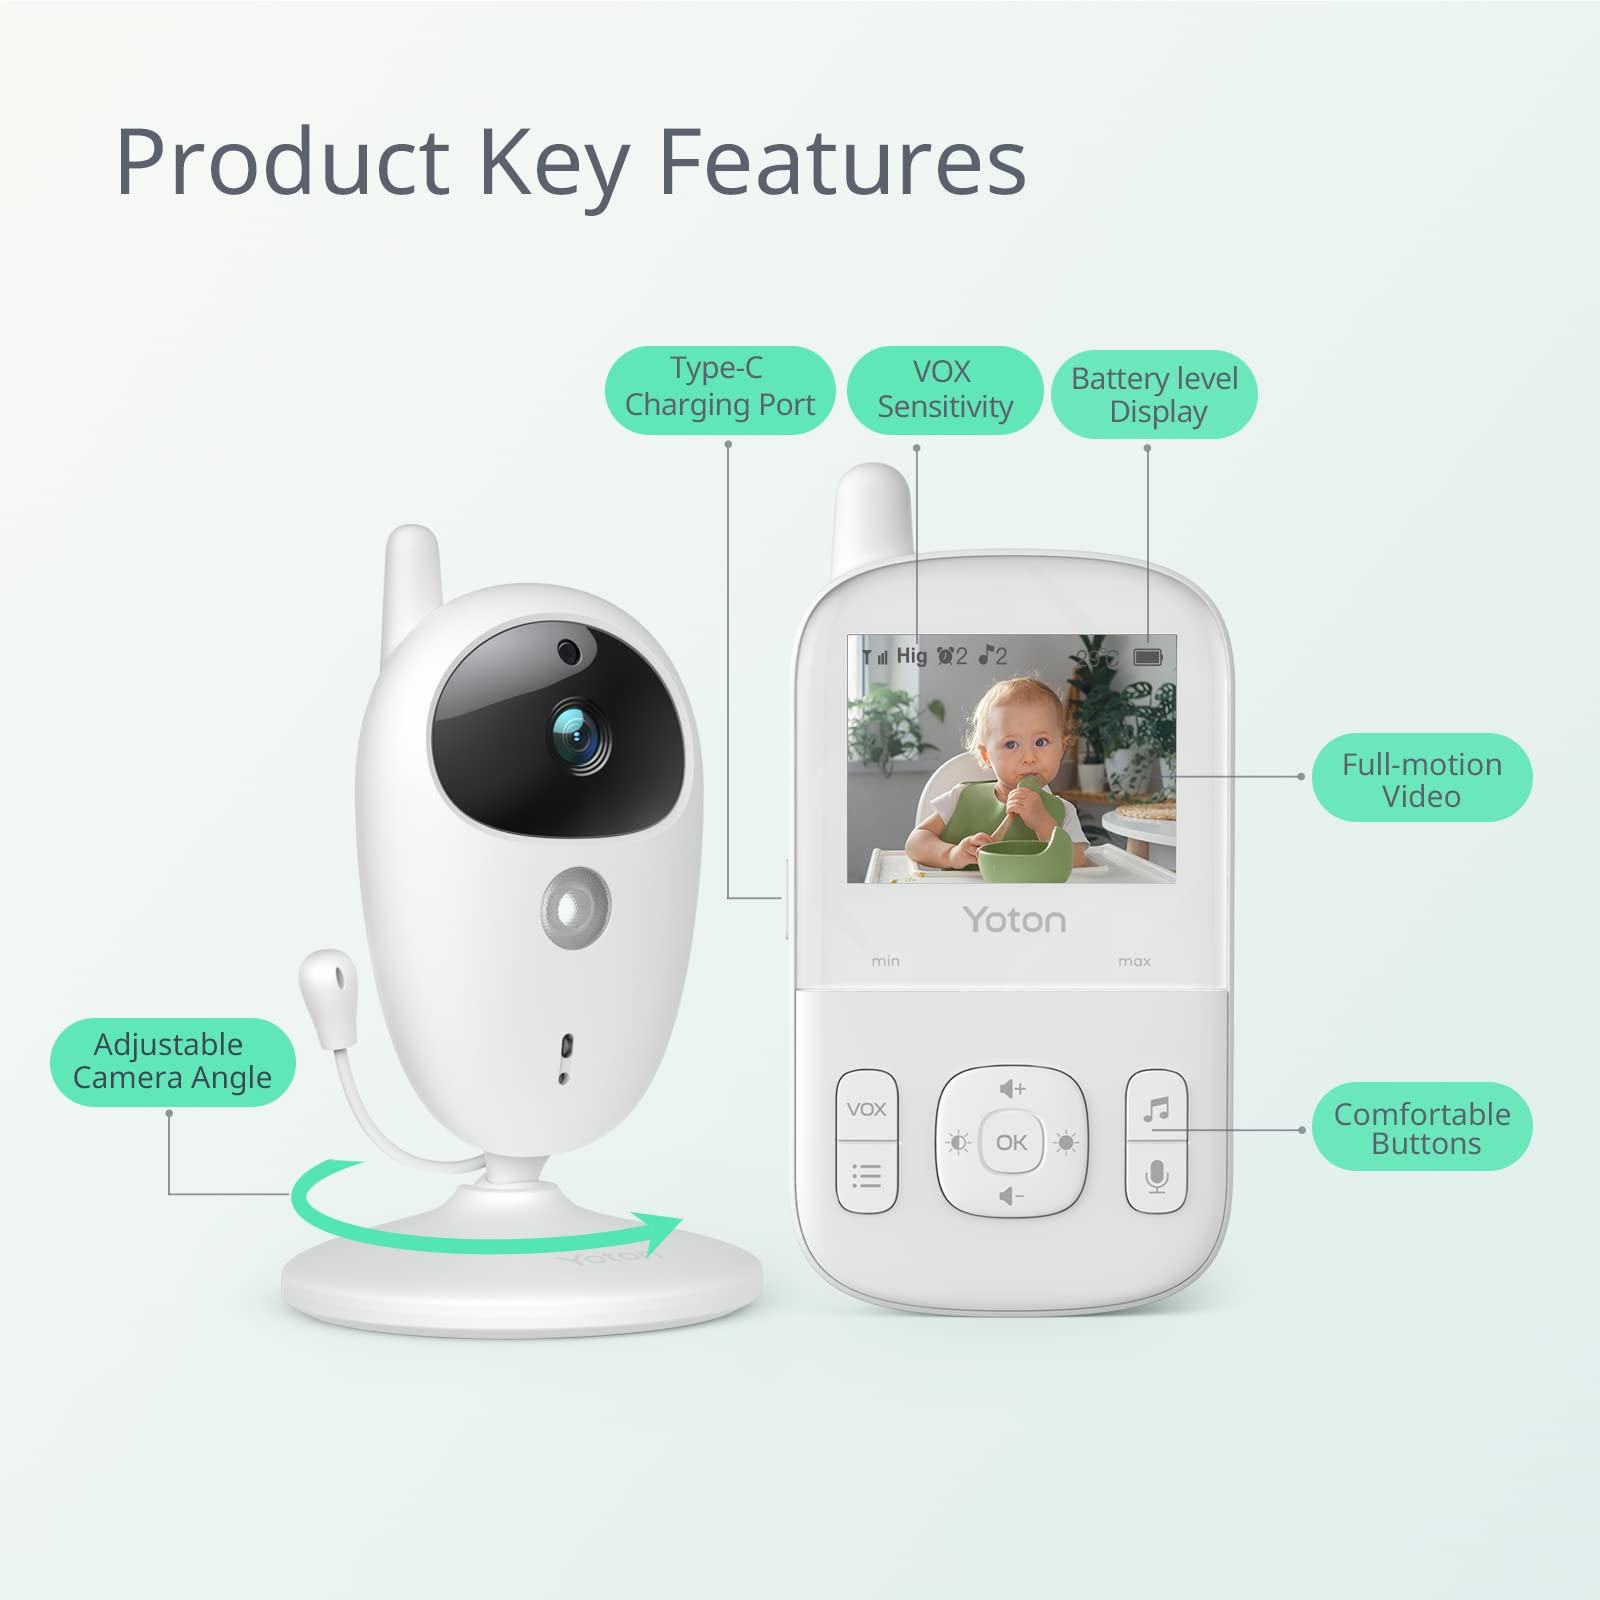 yoton YM04 portable baby monitor key features